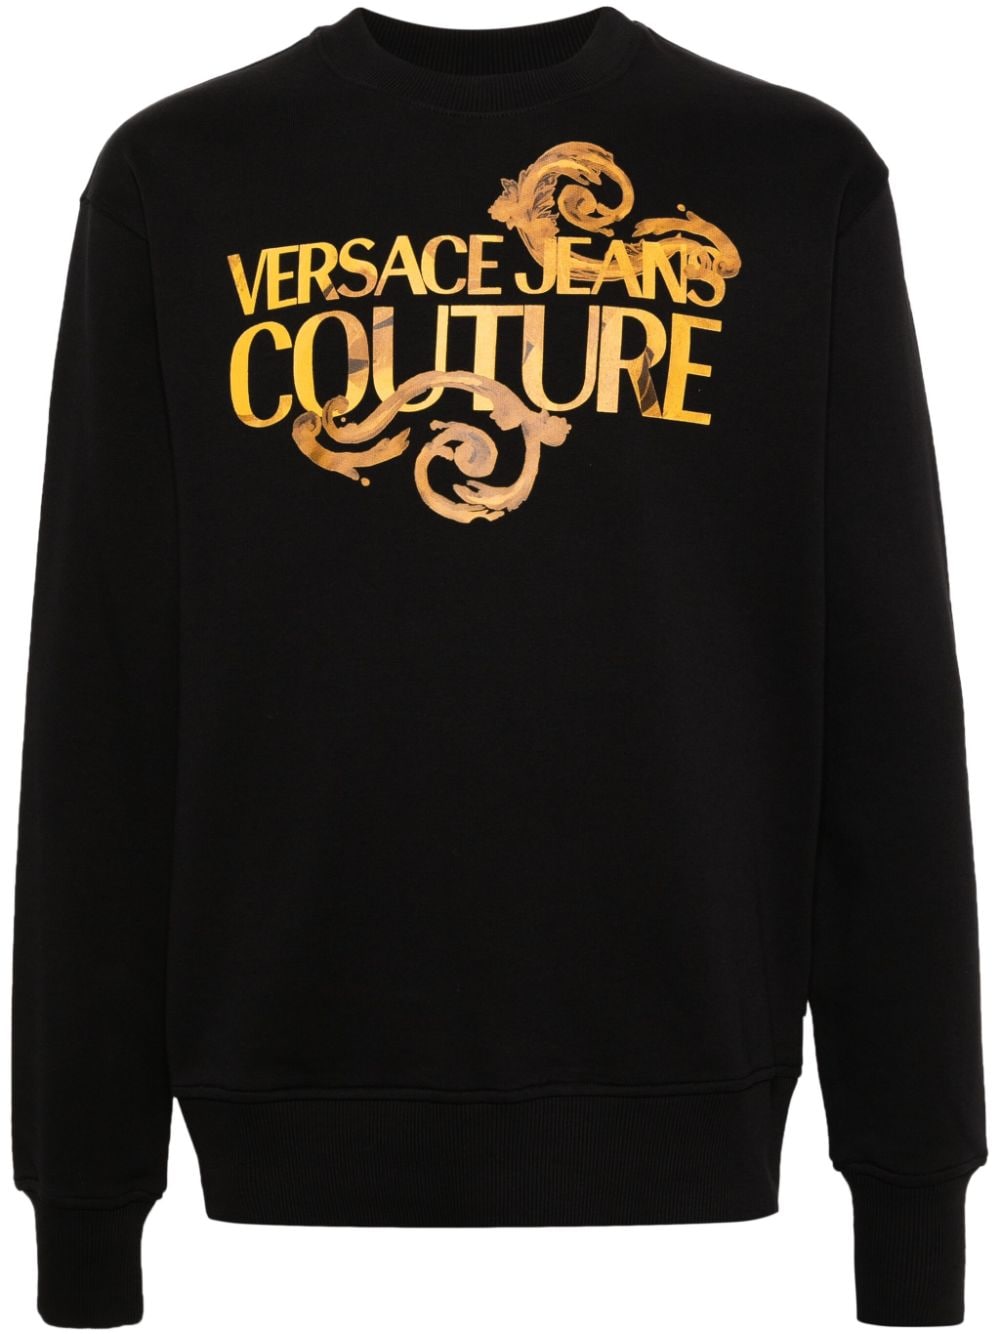 Versace Jeans Couture Barocco logo-print sweatshirt - Black von Versace Jeans Couture